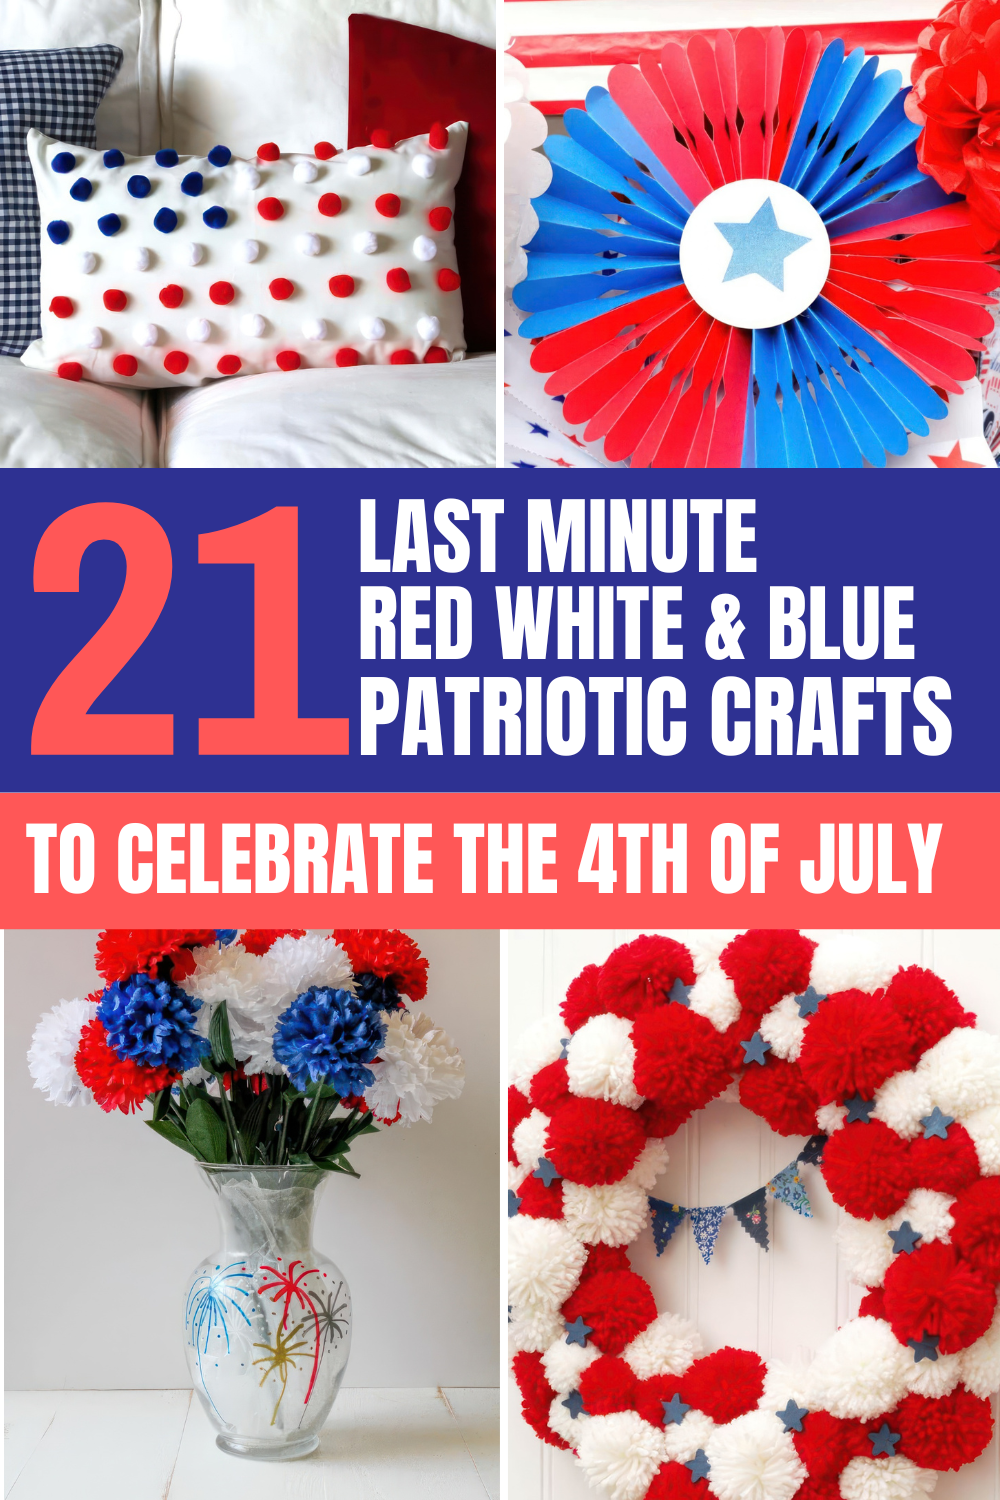 Celebrate the 4th of July in style with these elegant red, white, and blue crafts! Perfect for home decor and party decorations, these projects will add a sophisticated touch to your celebrations. Tap to explore all the festive ideas! 🇺🇸🖌️🎉

